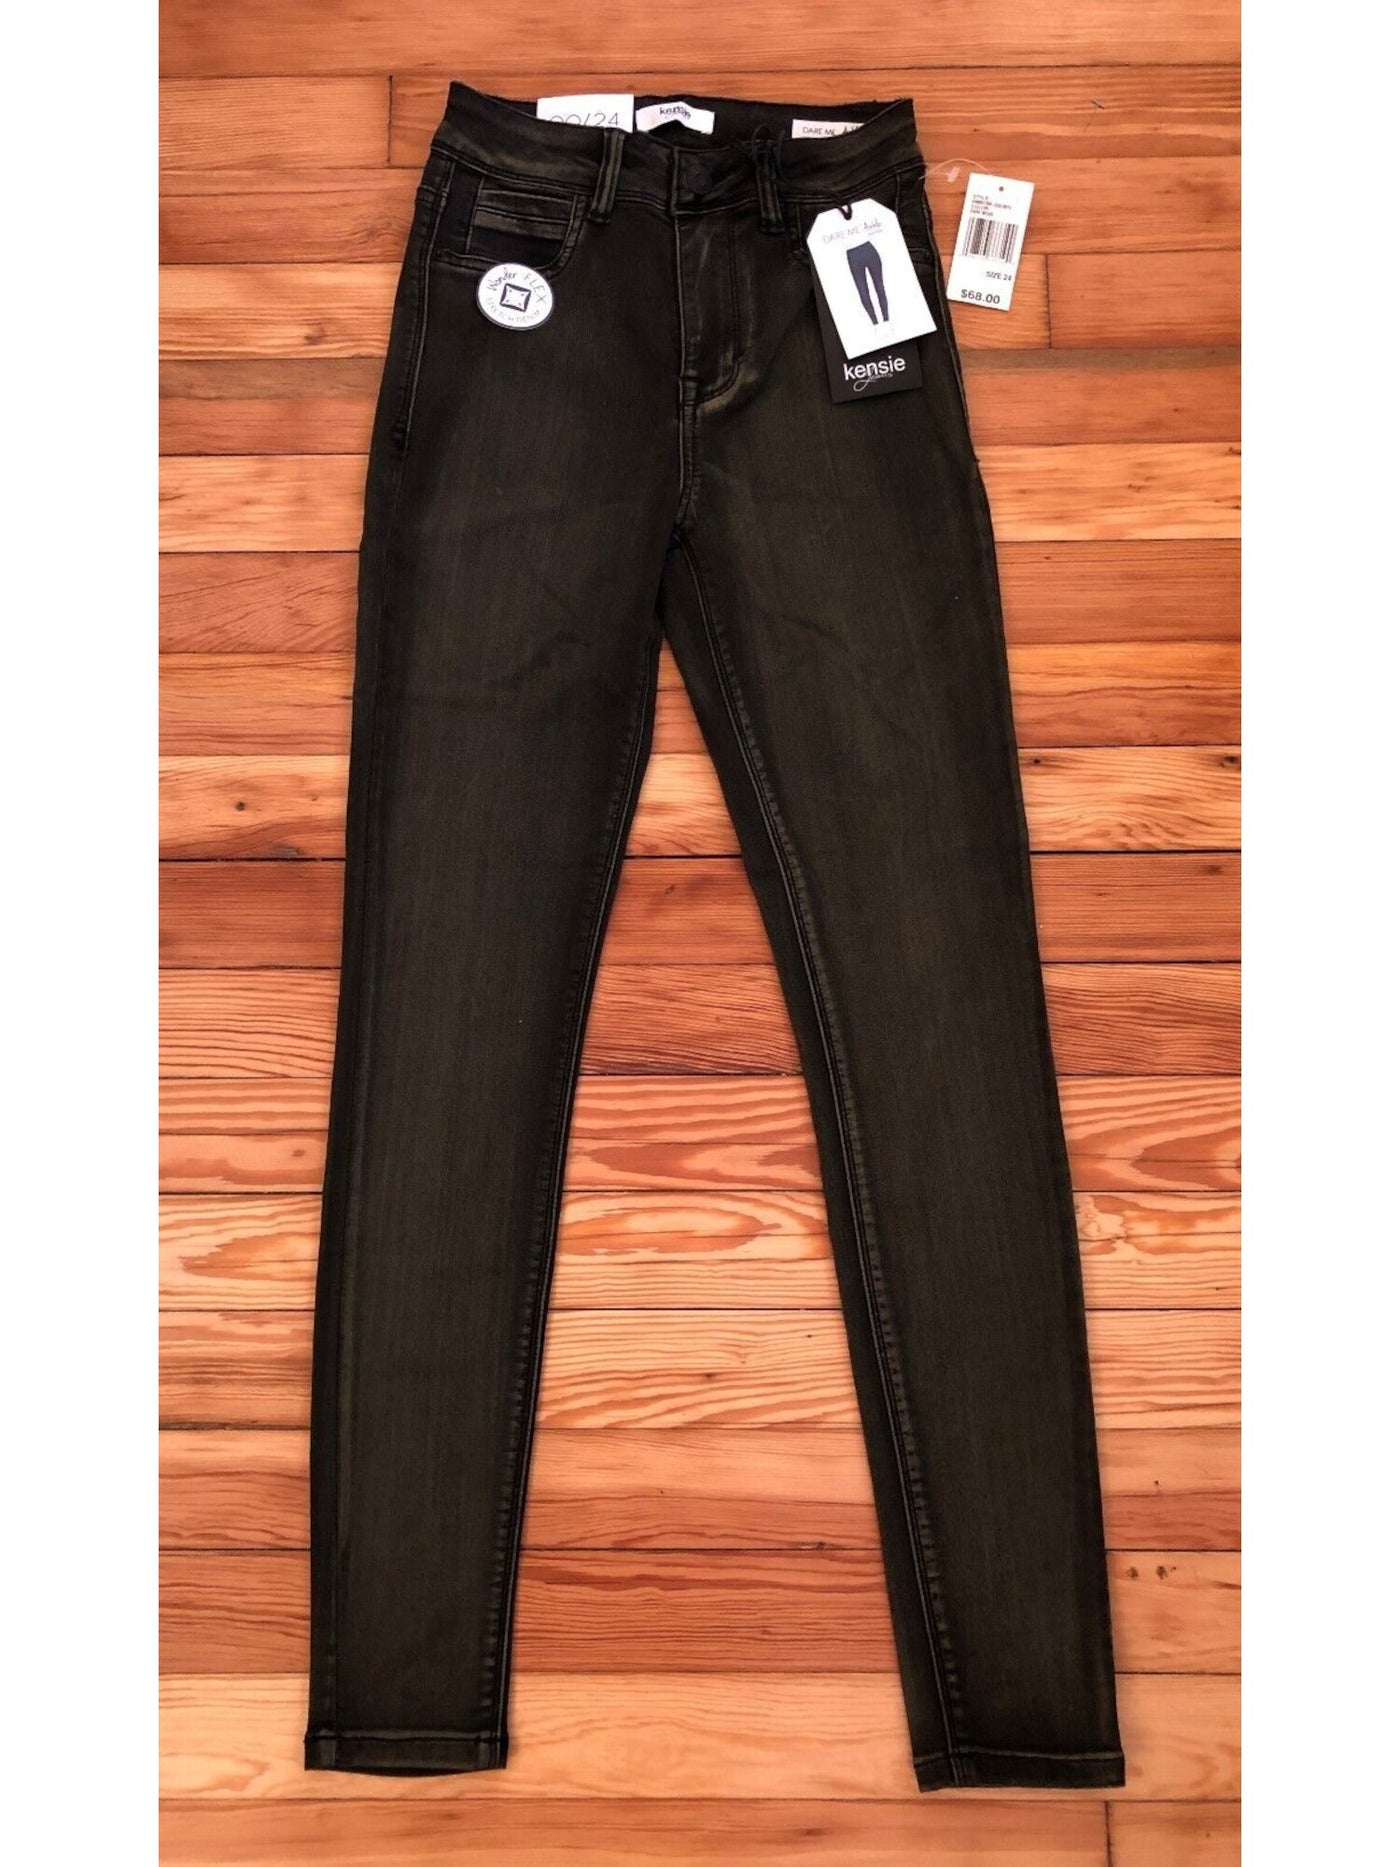 KENSIE JEANS Womens Black Stretch Zippered Pocketed Narrow Leg Above Ankle High Waist Jeans 0/25